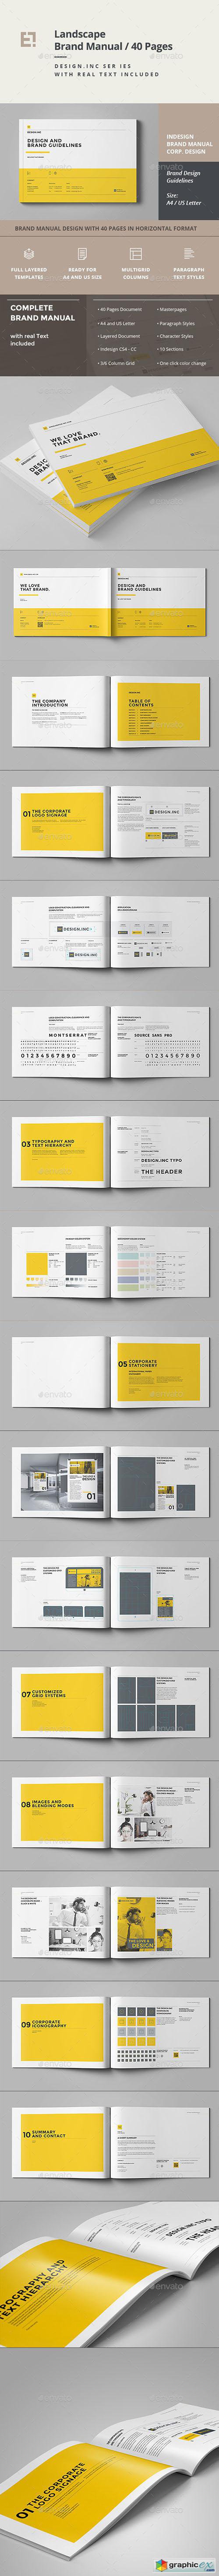 Brand Manual 40 Pages